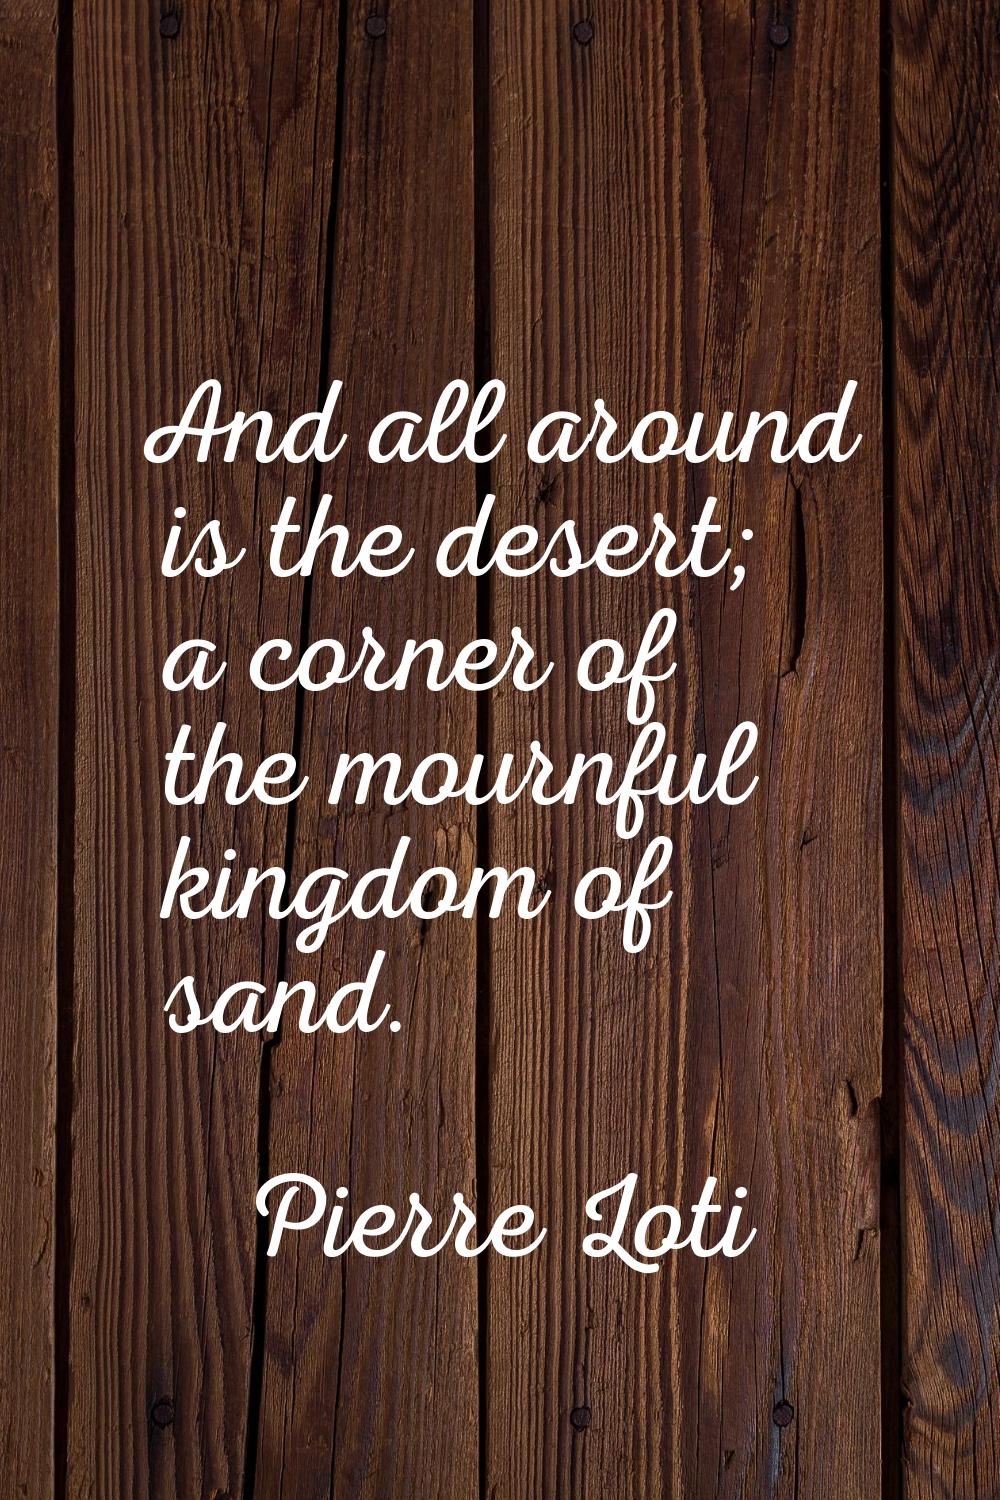 And all around is the desert; a corner of the mournful kingdom of sand.